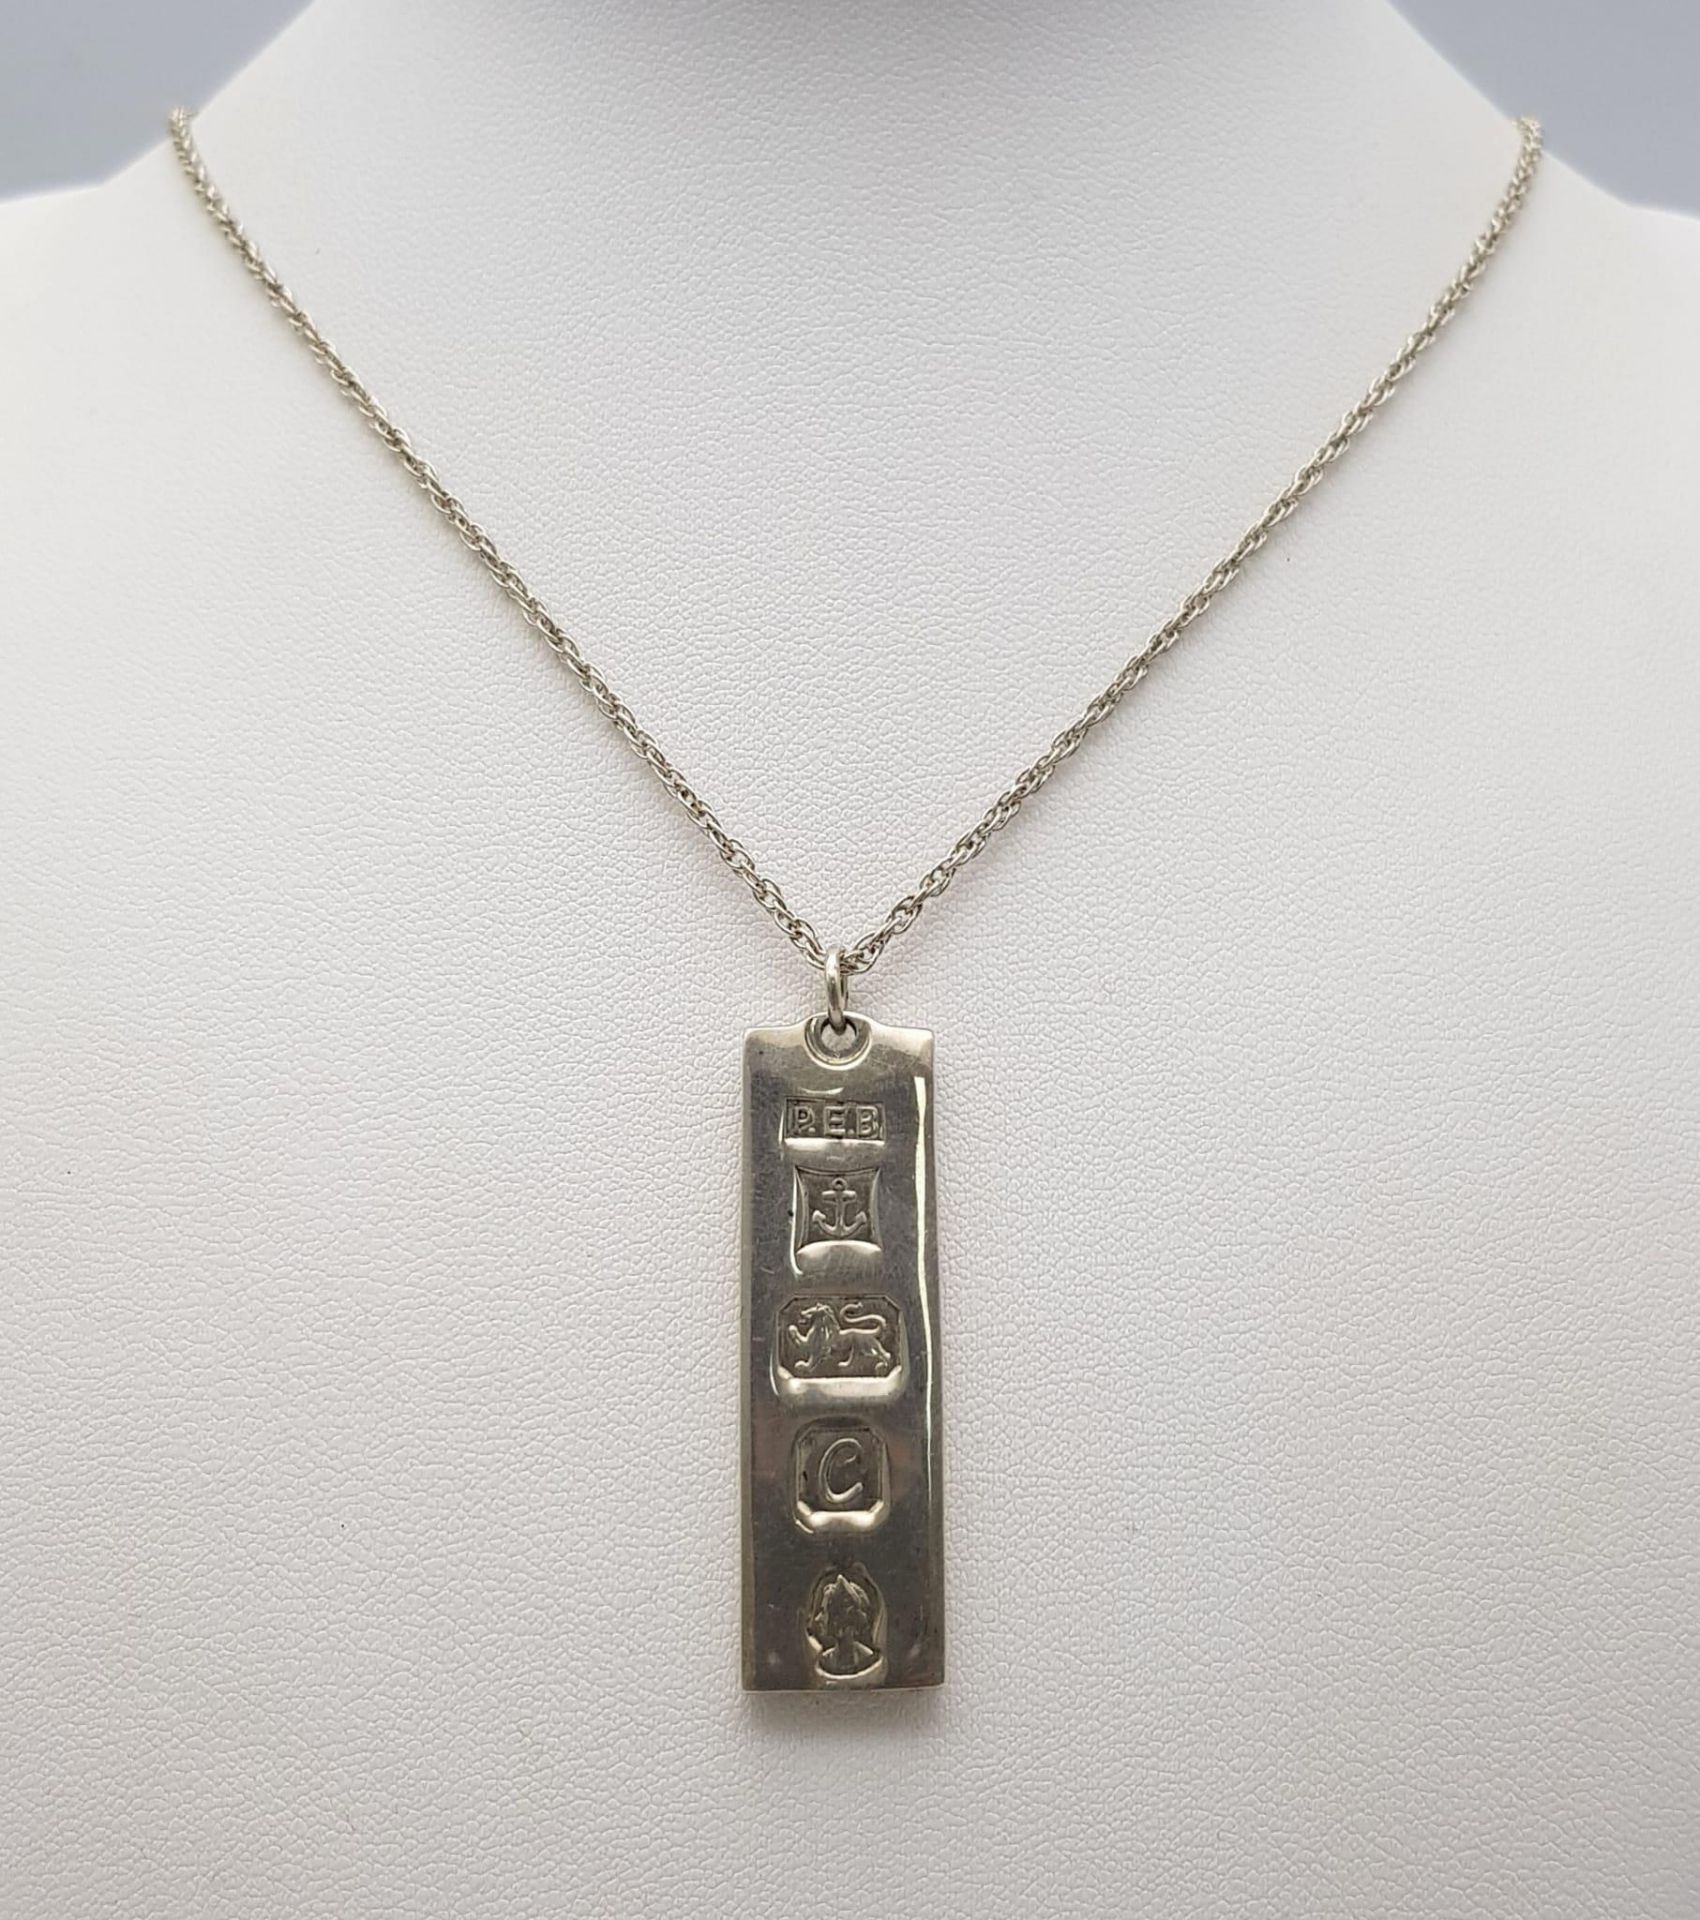 A Hallmarked 1977 (Jubilee Year) Silver Ingot Pendant Necklace. Pendant Measures 4.5cm Length on - Image 4 of 4